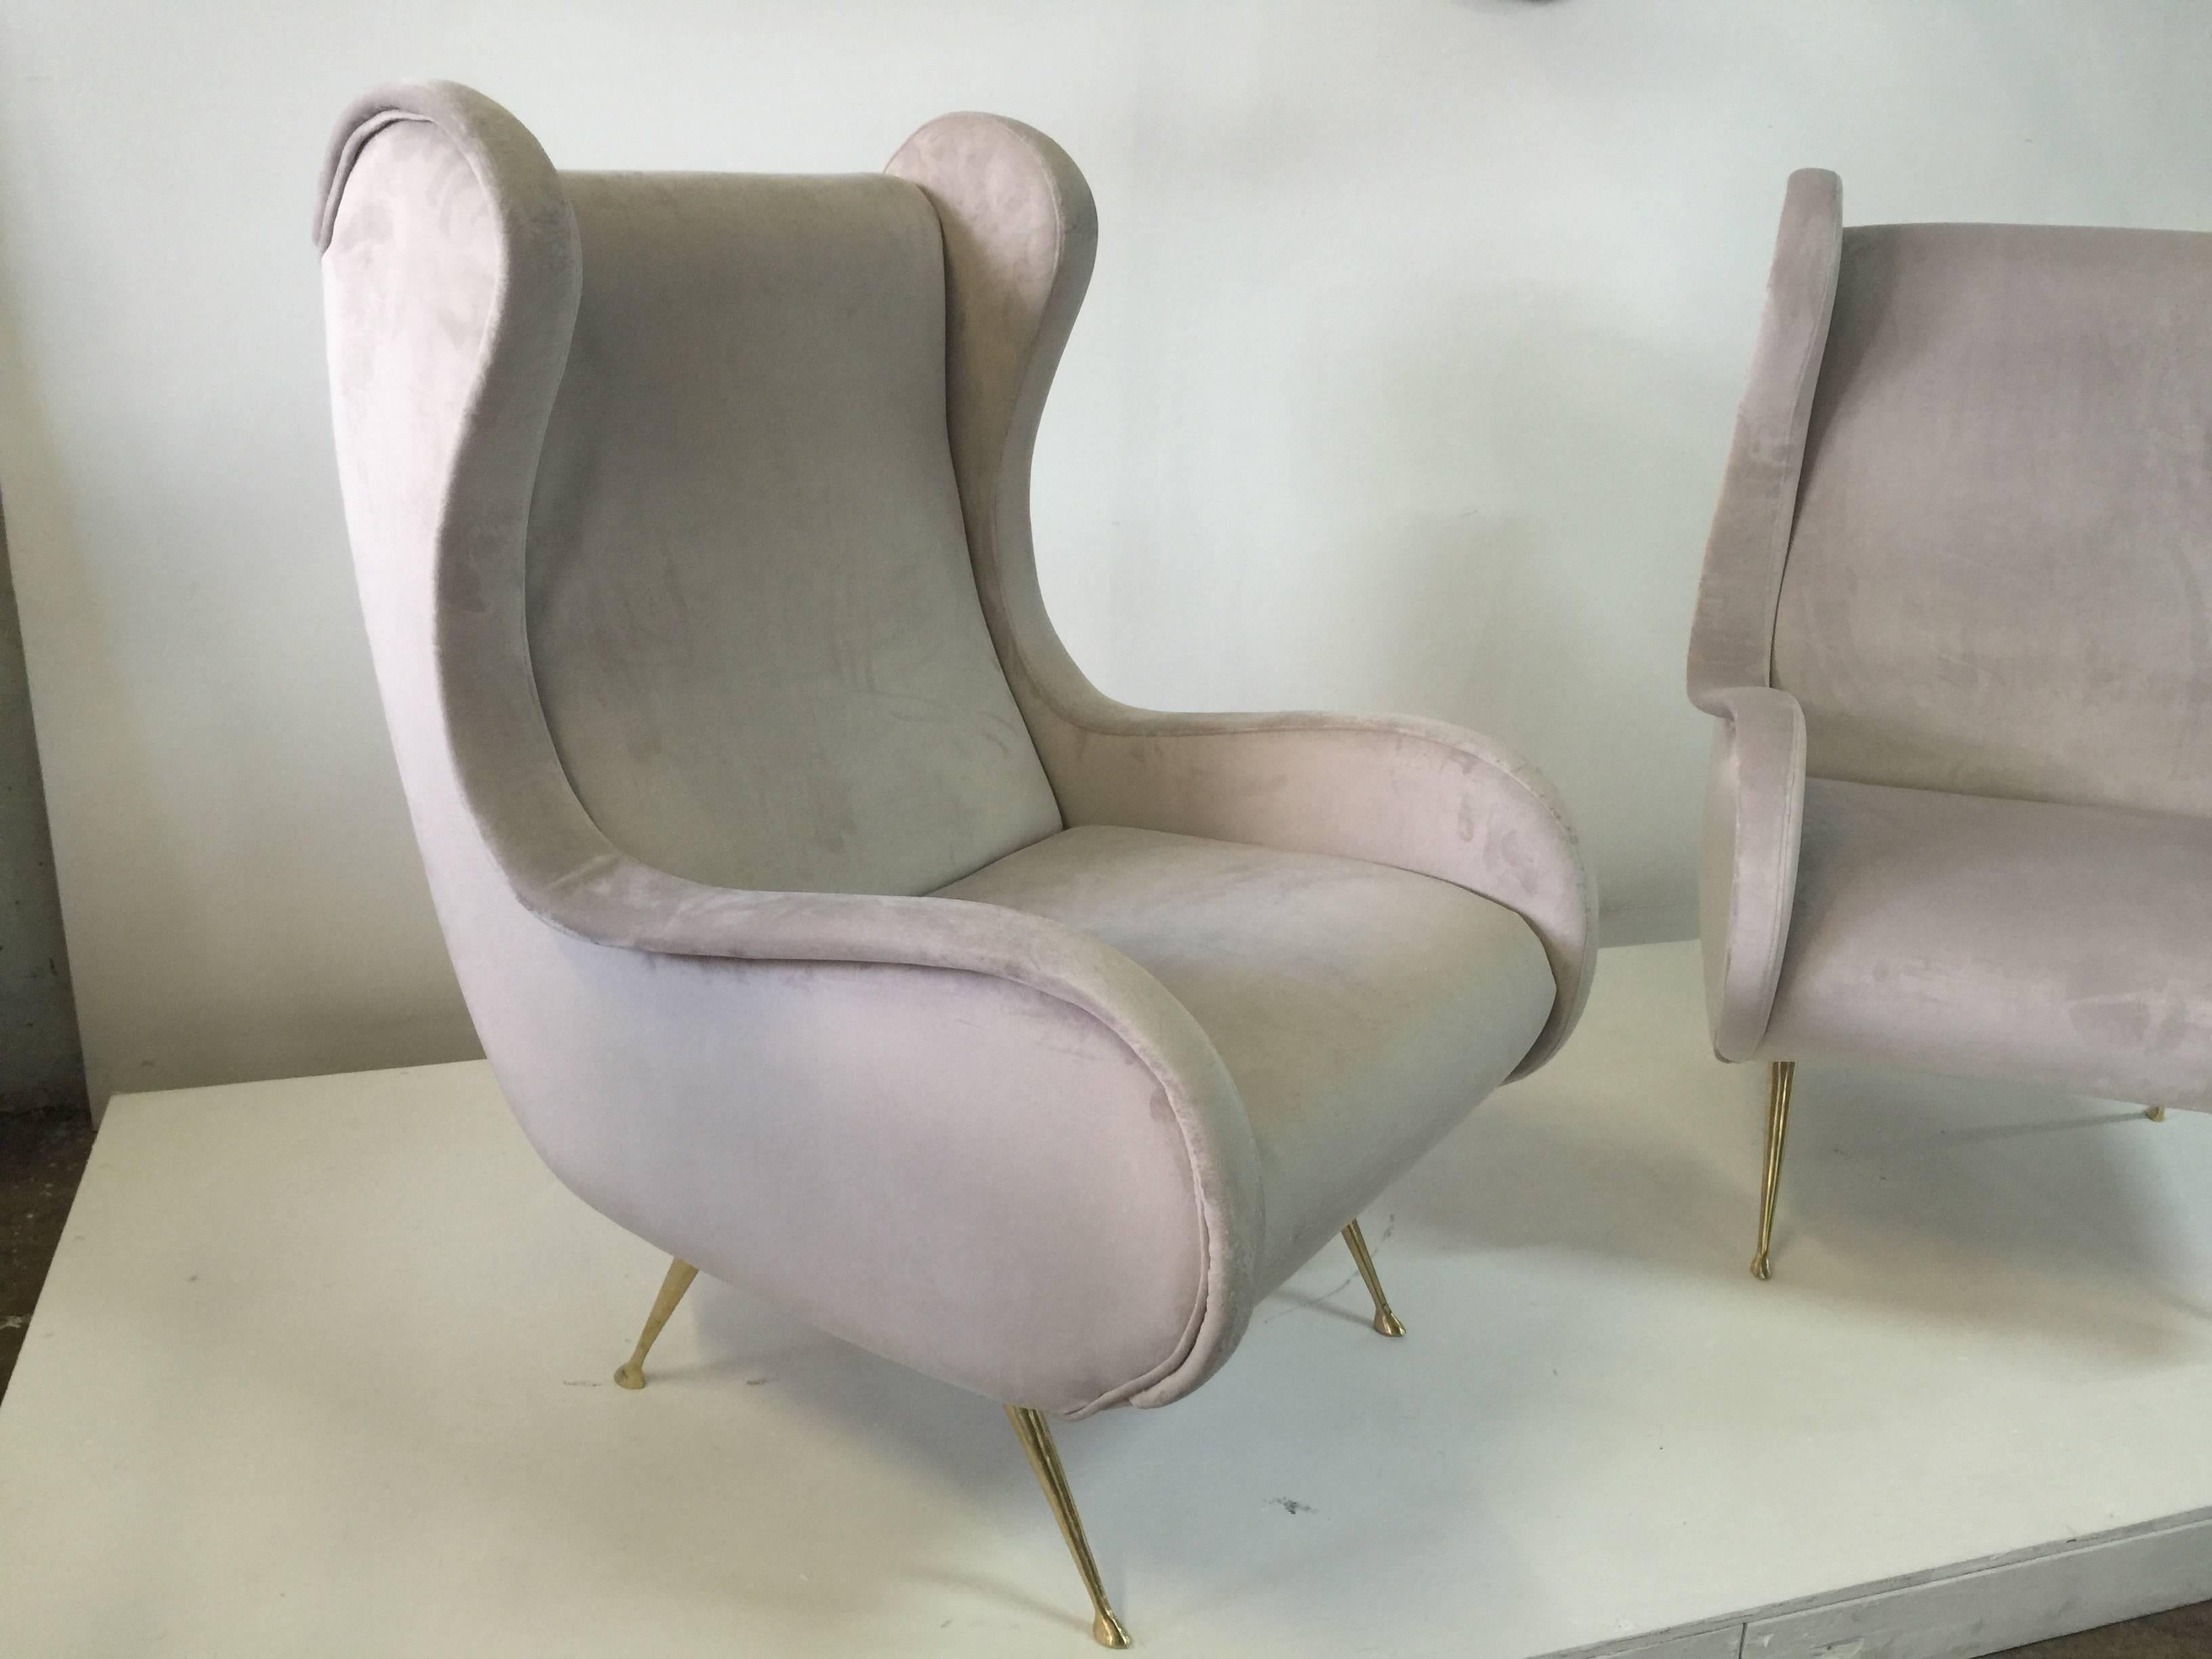 Finished in a soft beige fabric and brass feet, these winged armchairs are very stylish.  This item is currently located in our Miami showroom.